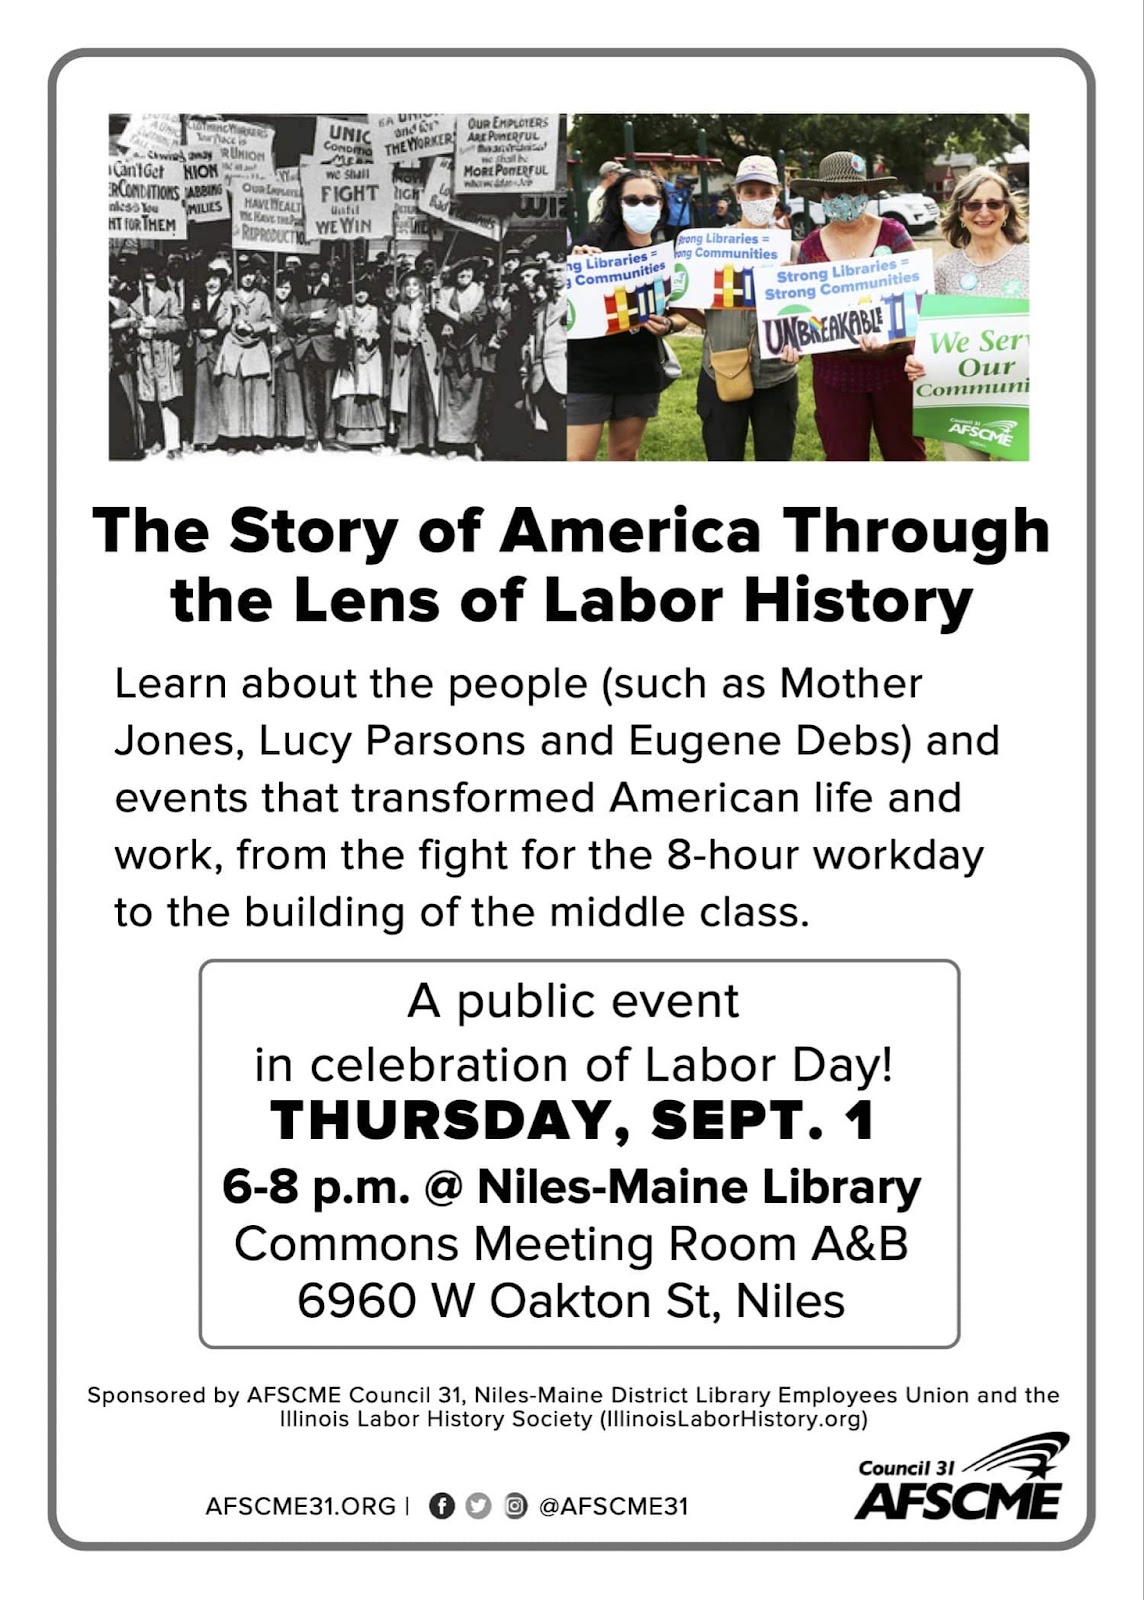 A flier for the labor history event at Niles-Maine District Library